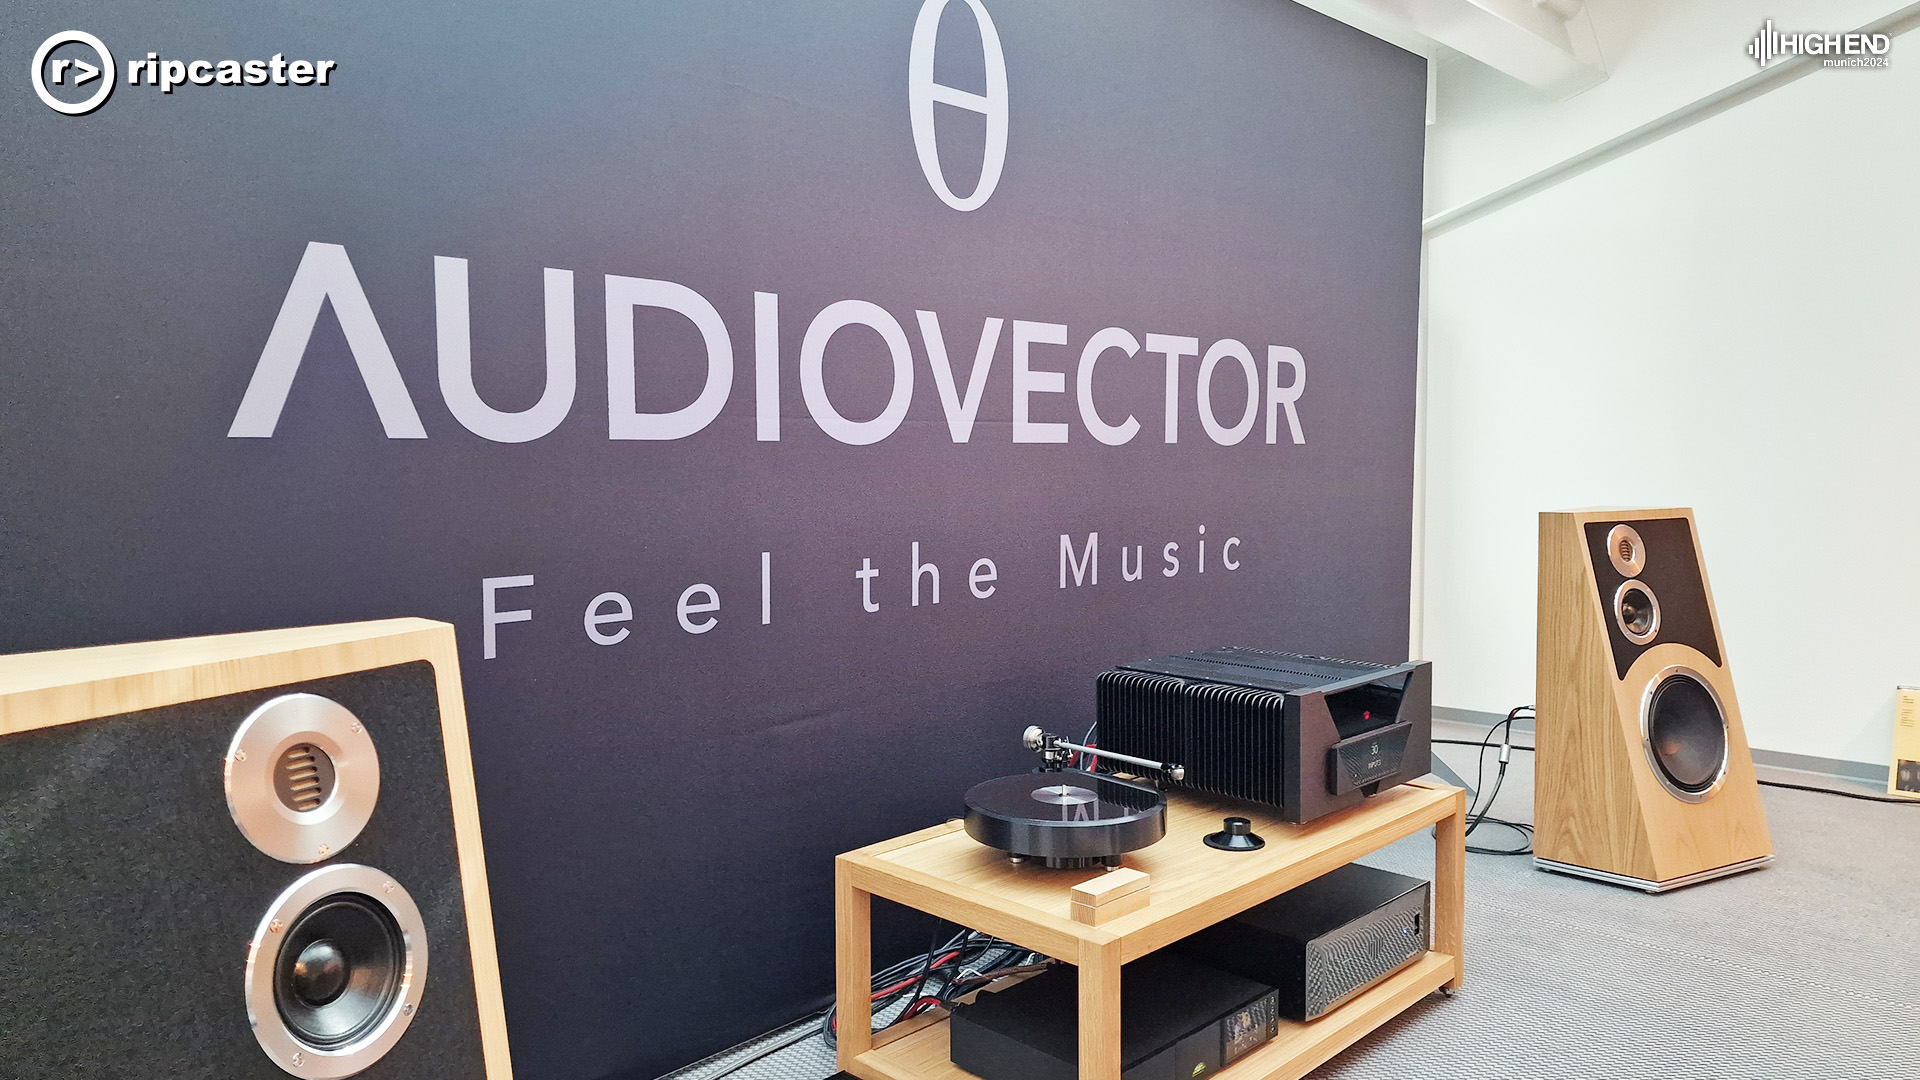 Audiovector in big letters on the backdrop with the words "Feel the Music".  A pair of the new Audiovector speakers either side of some HiFi equipment on a low stand.  The new Audiovector speakers have the shape of a traditional wedge standing up on the larger of the two ends